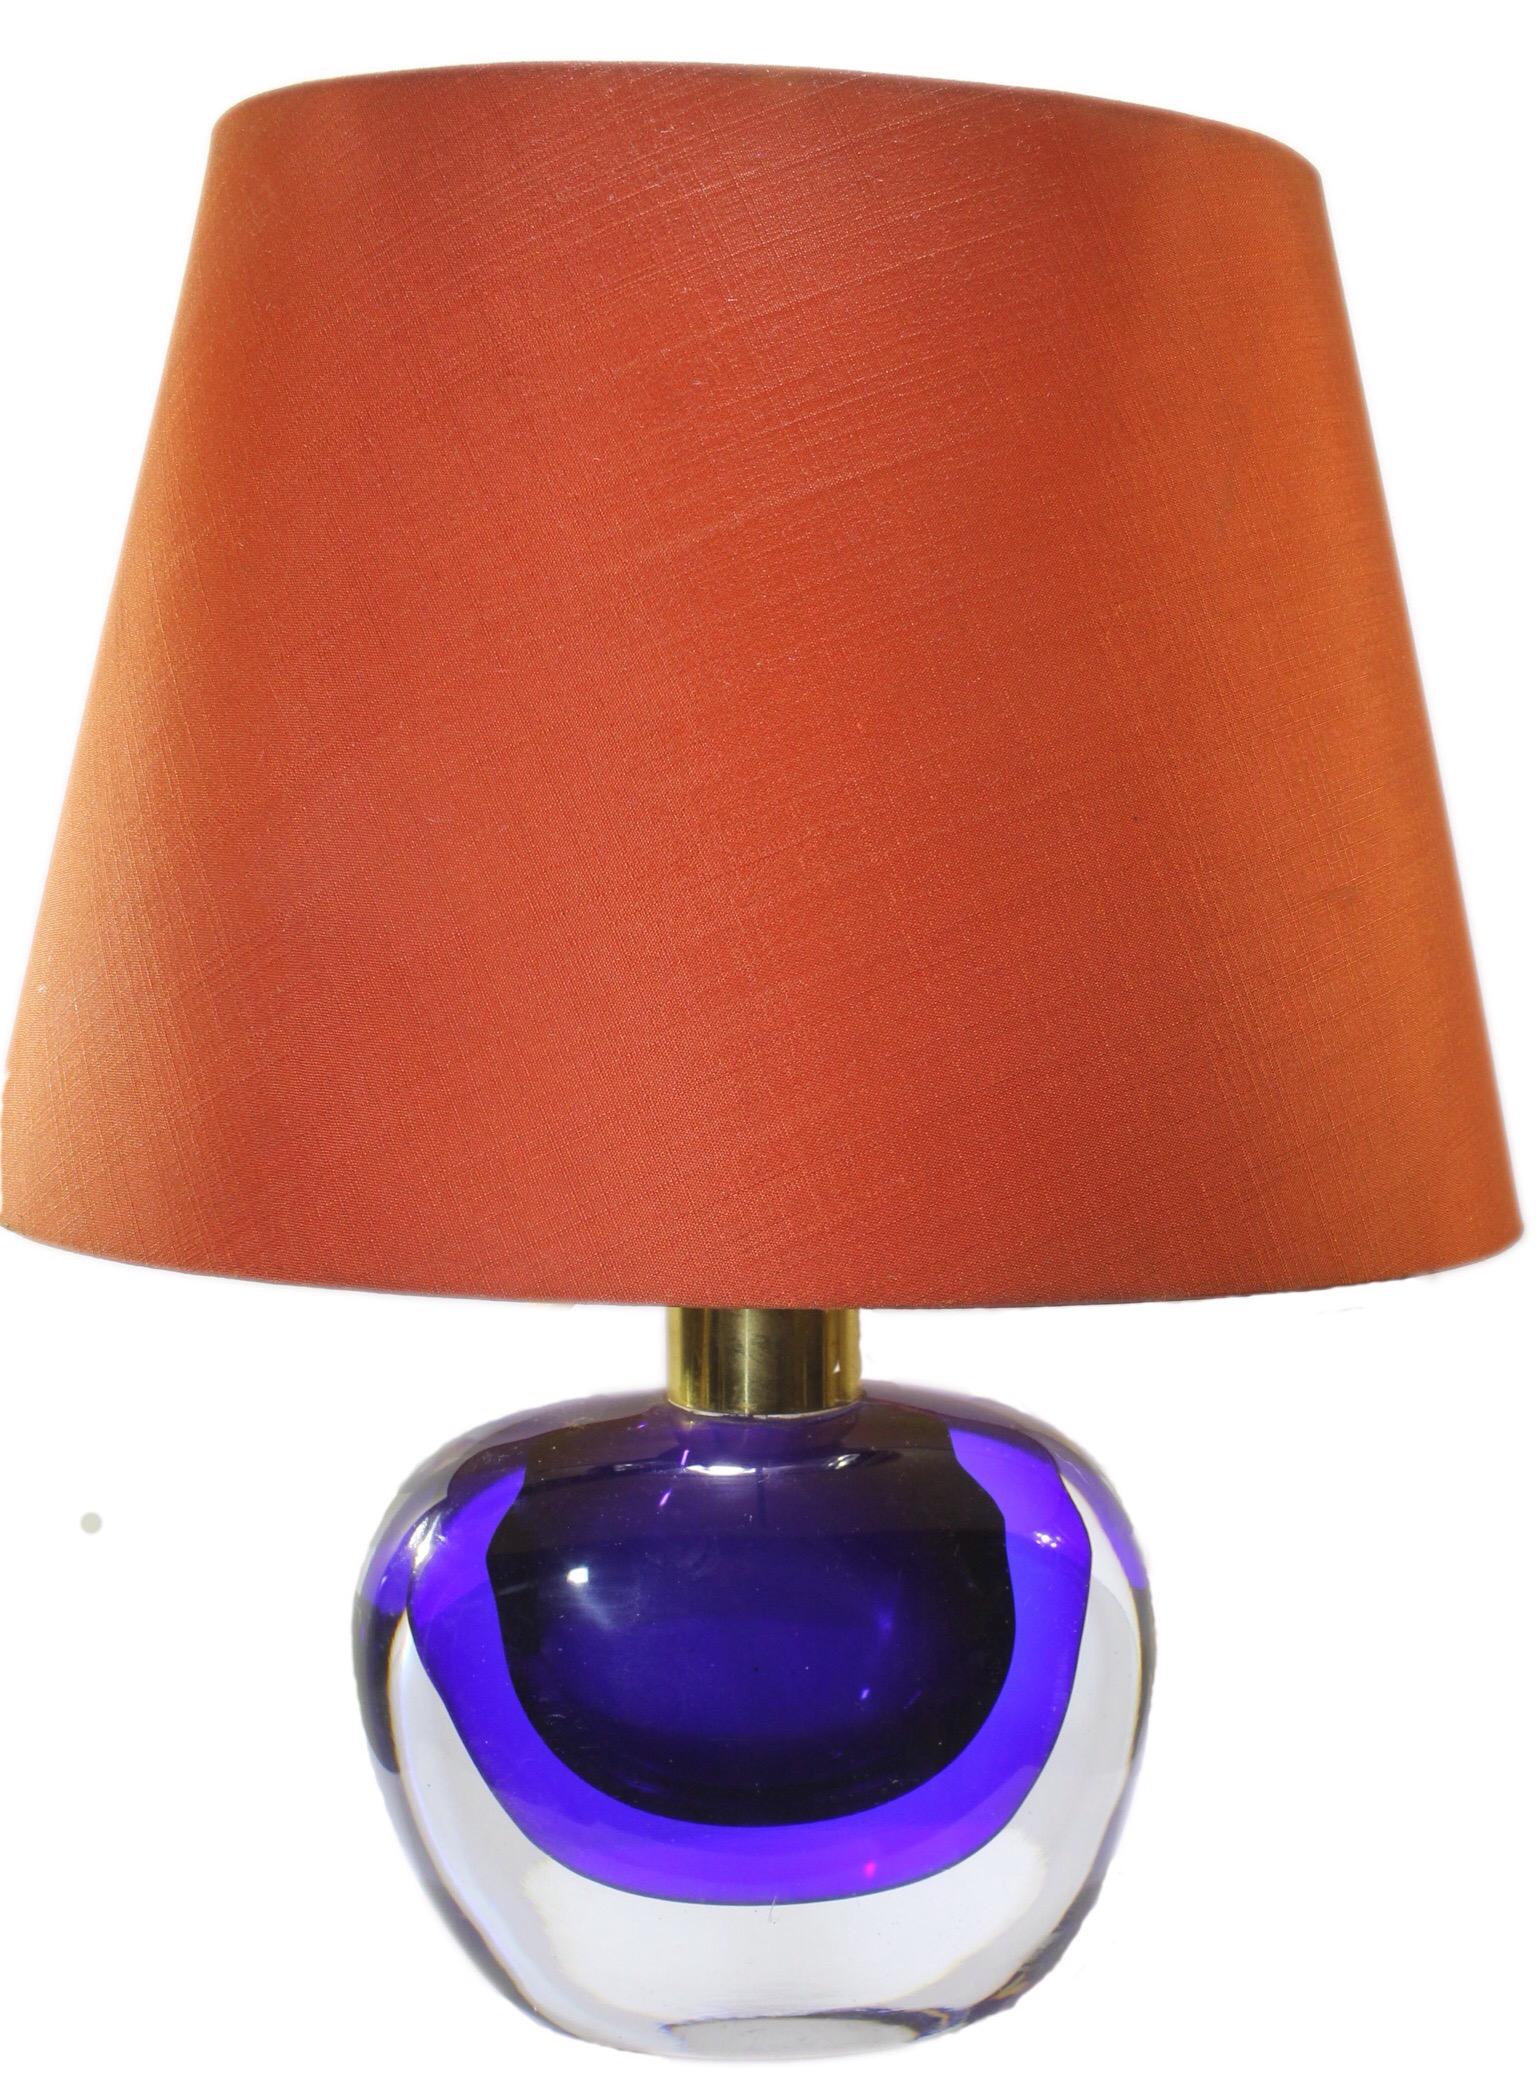 Vintage Murano globe-shaped lamp made in cobalt blue ideal for a bedside or side table, when lit it gives a dramatic jewel-like effect This solid lamp base, 

This table lamp in excellent condition and in full working order. Fitting lamp